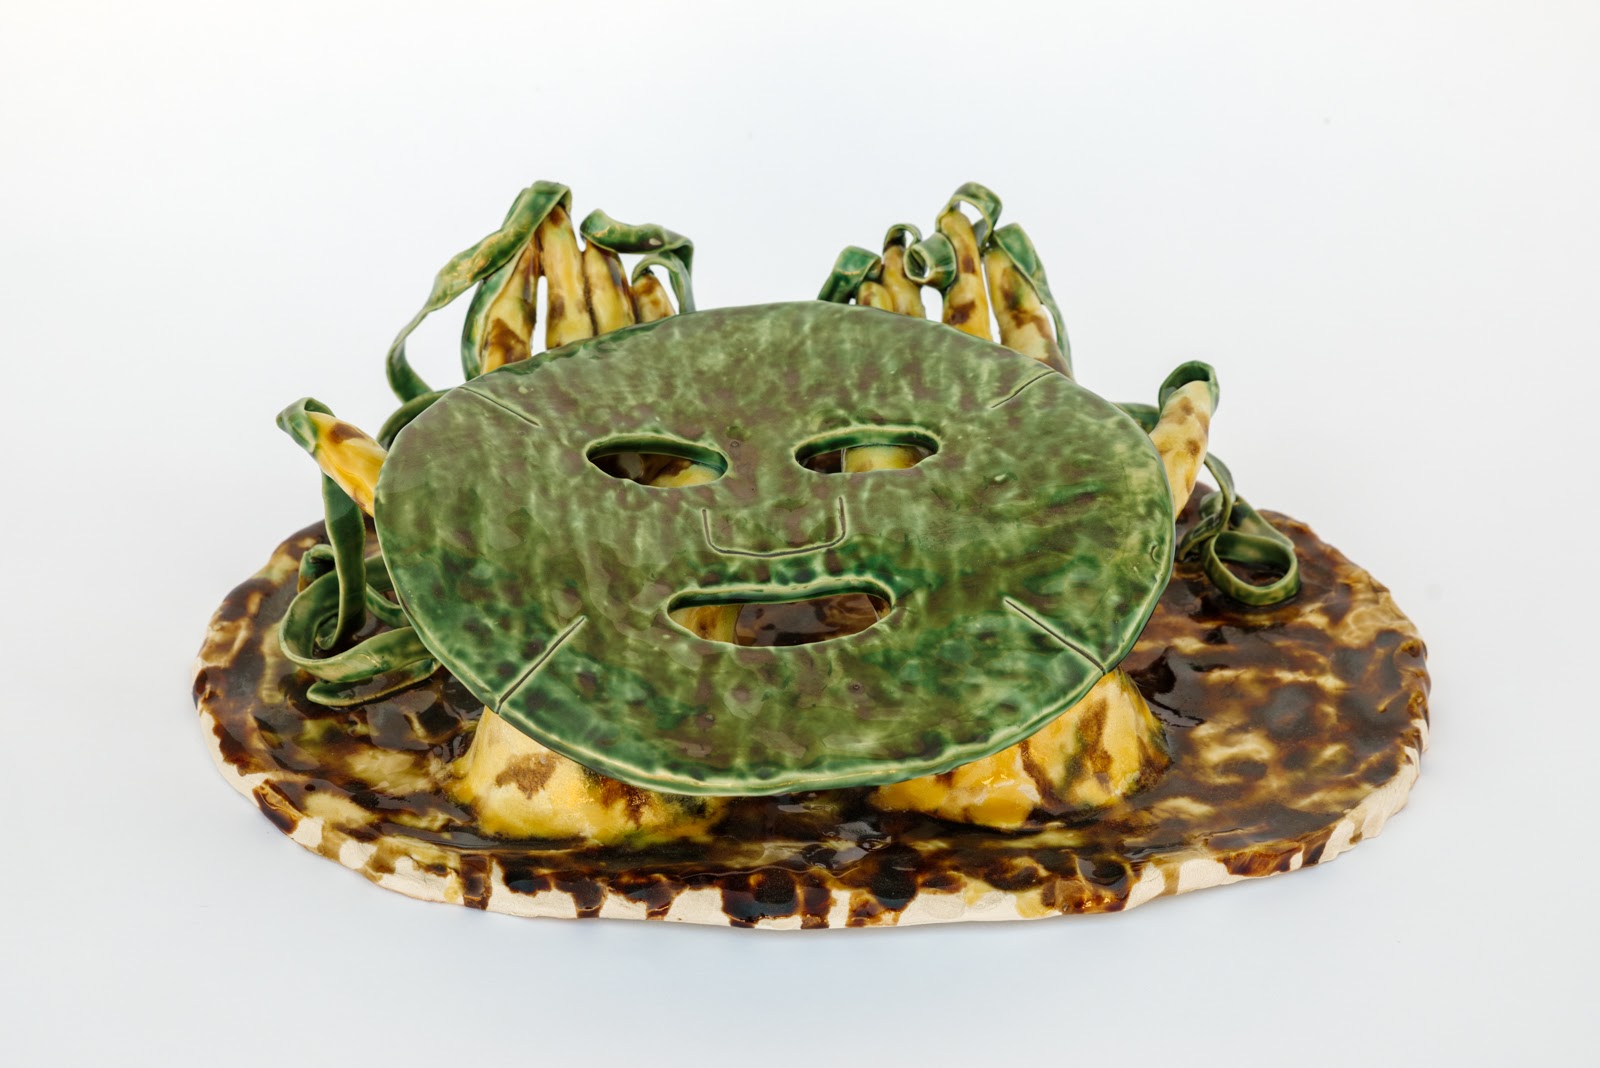 A flat green ceramic face-like shape resting atop another flat ceramic form with brown and yellow glaze.